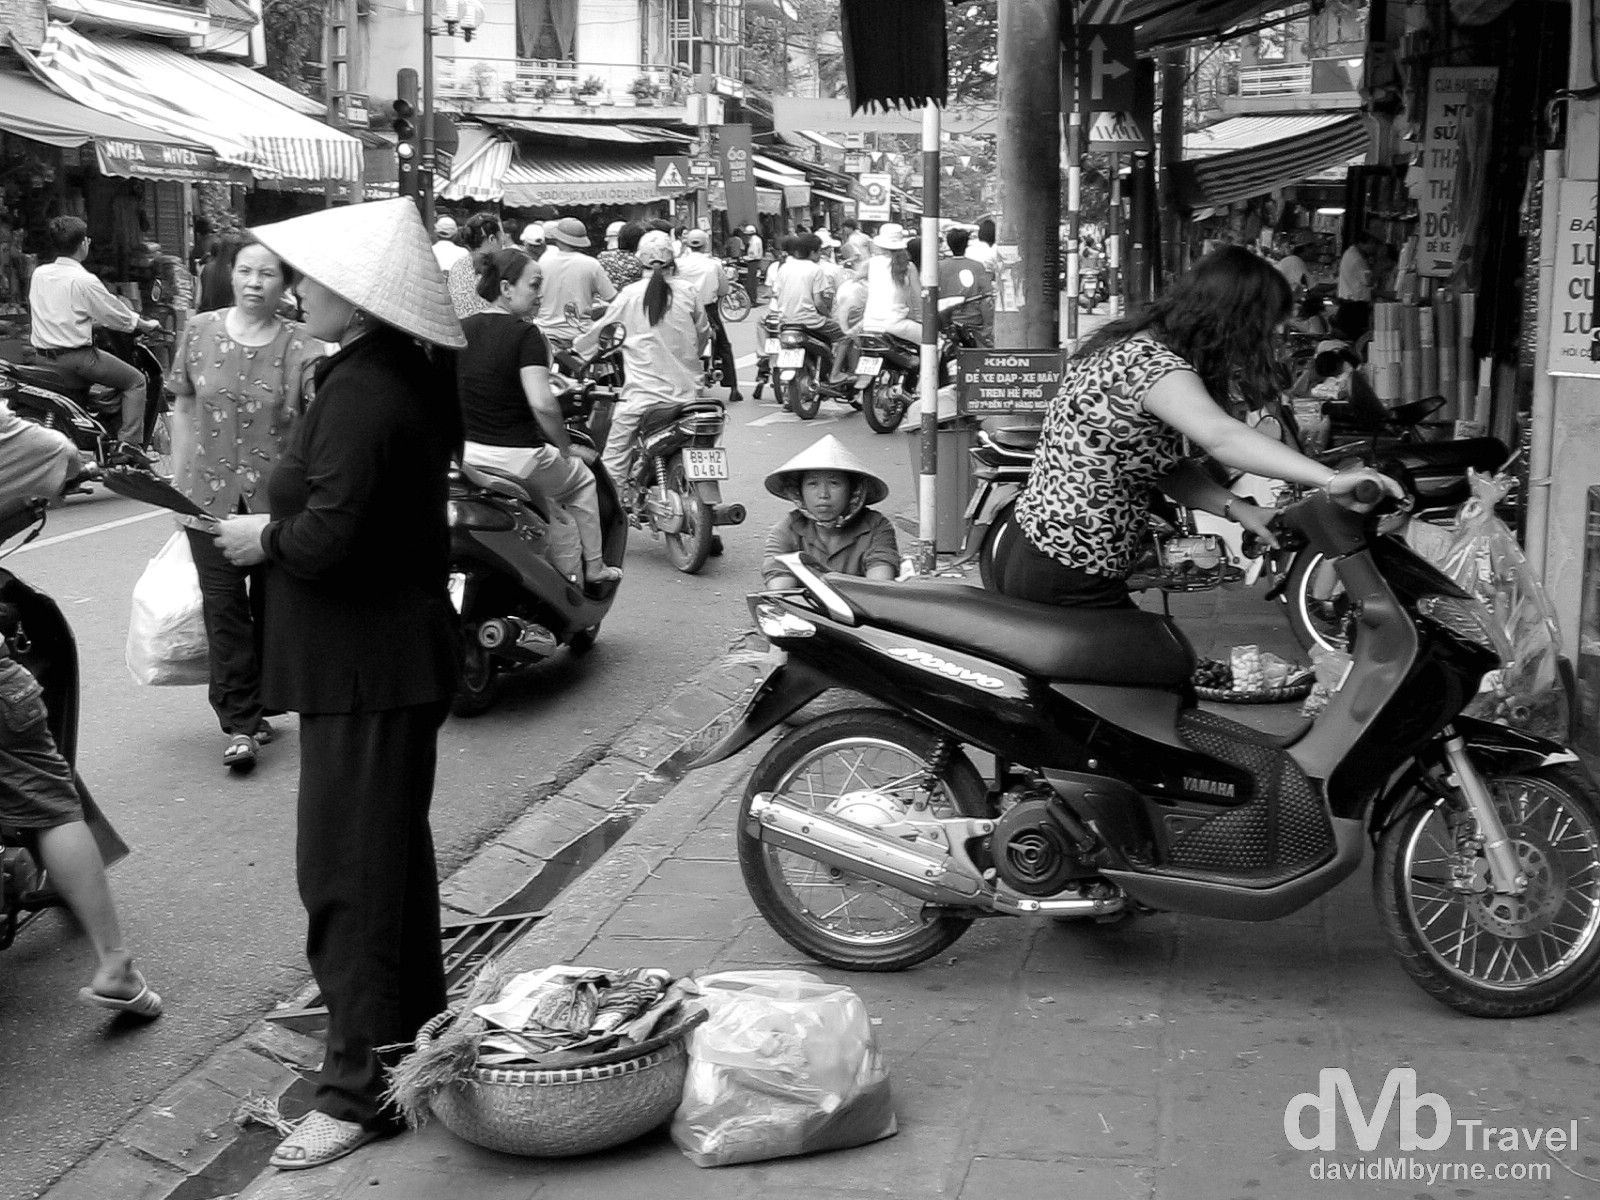 Activity in a busy section of the Old Quarter in Hanoi, Vietnam. September 5th 2005.